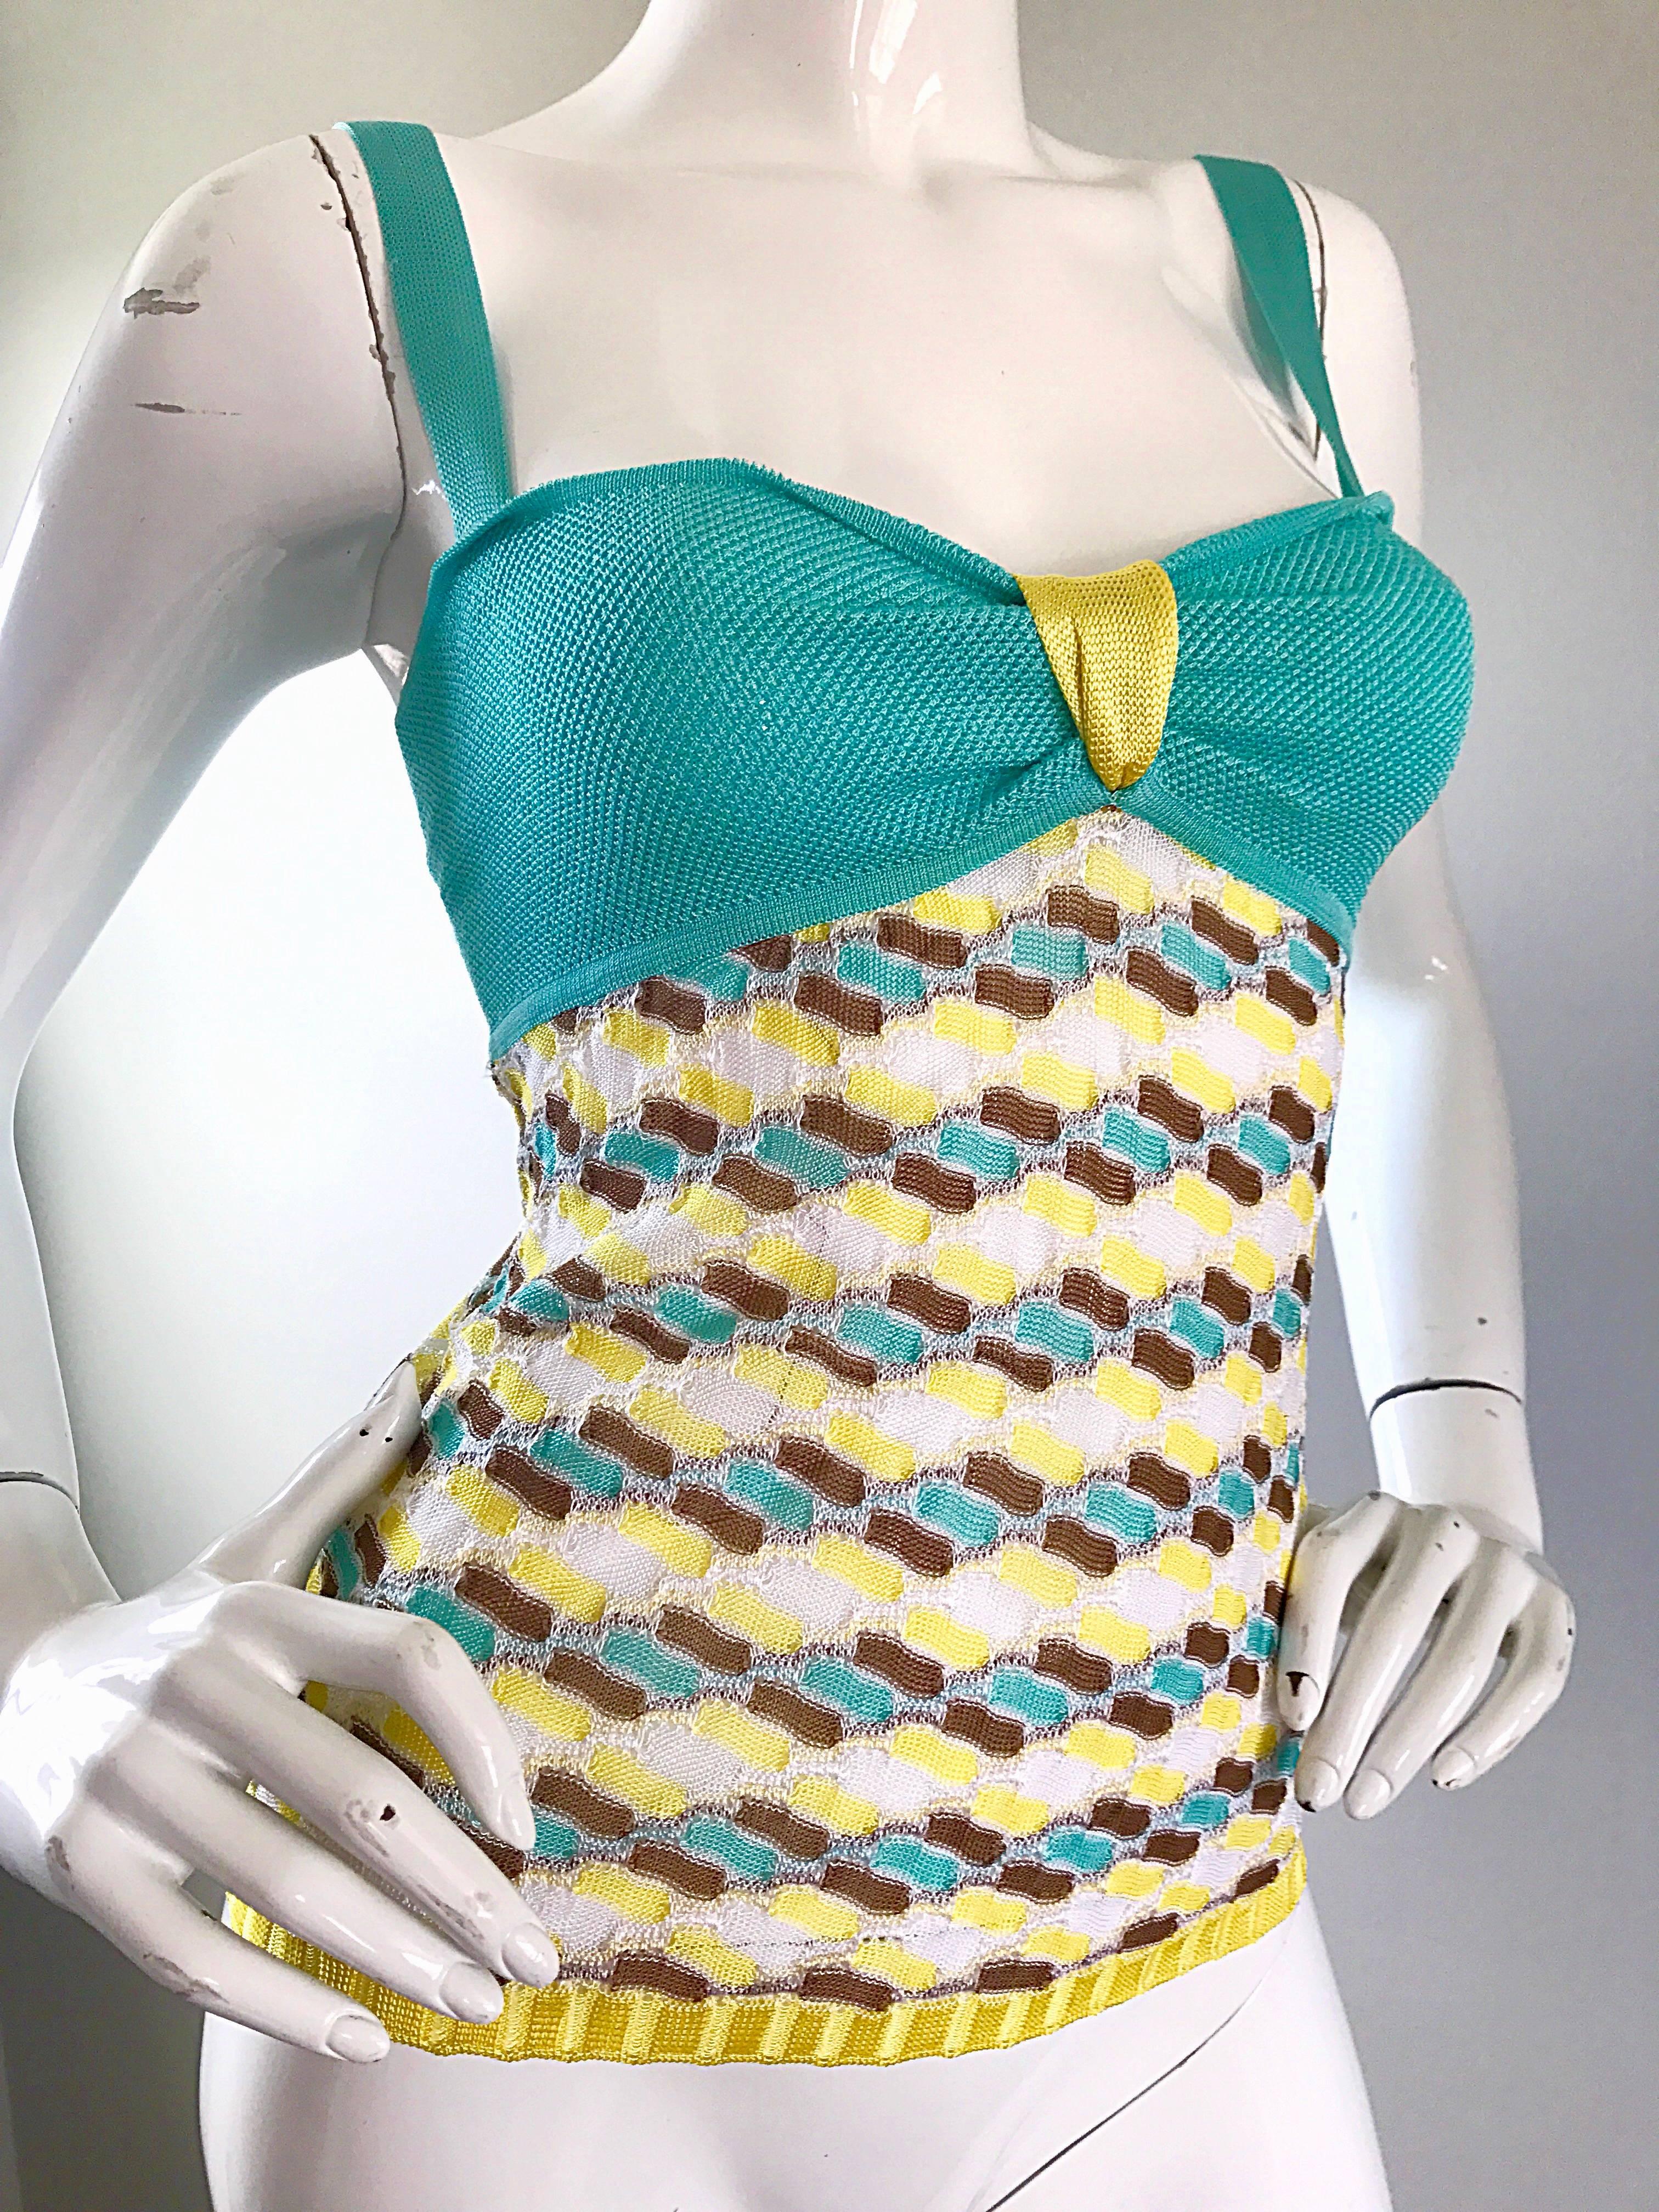 Women's Vintage Missoni 1990s Turquoise Blue + Yellow + White + Brown Knit Rayon 90s Top